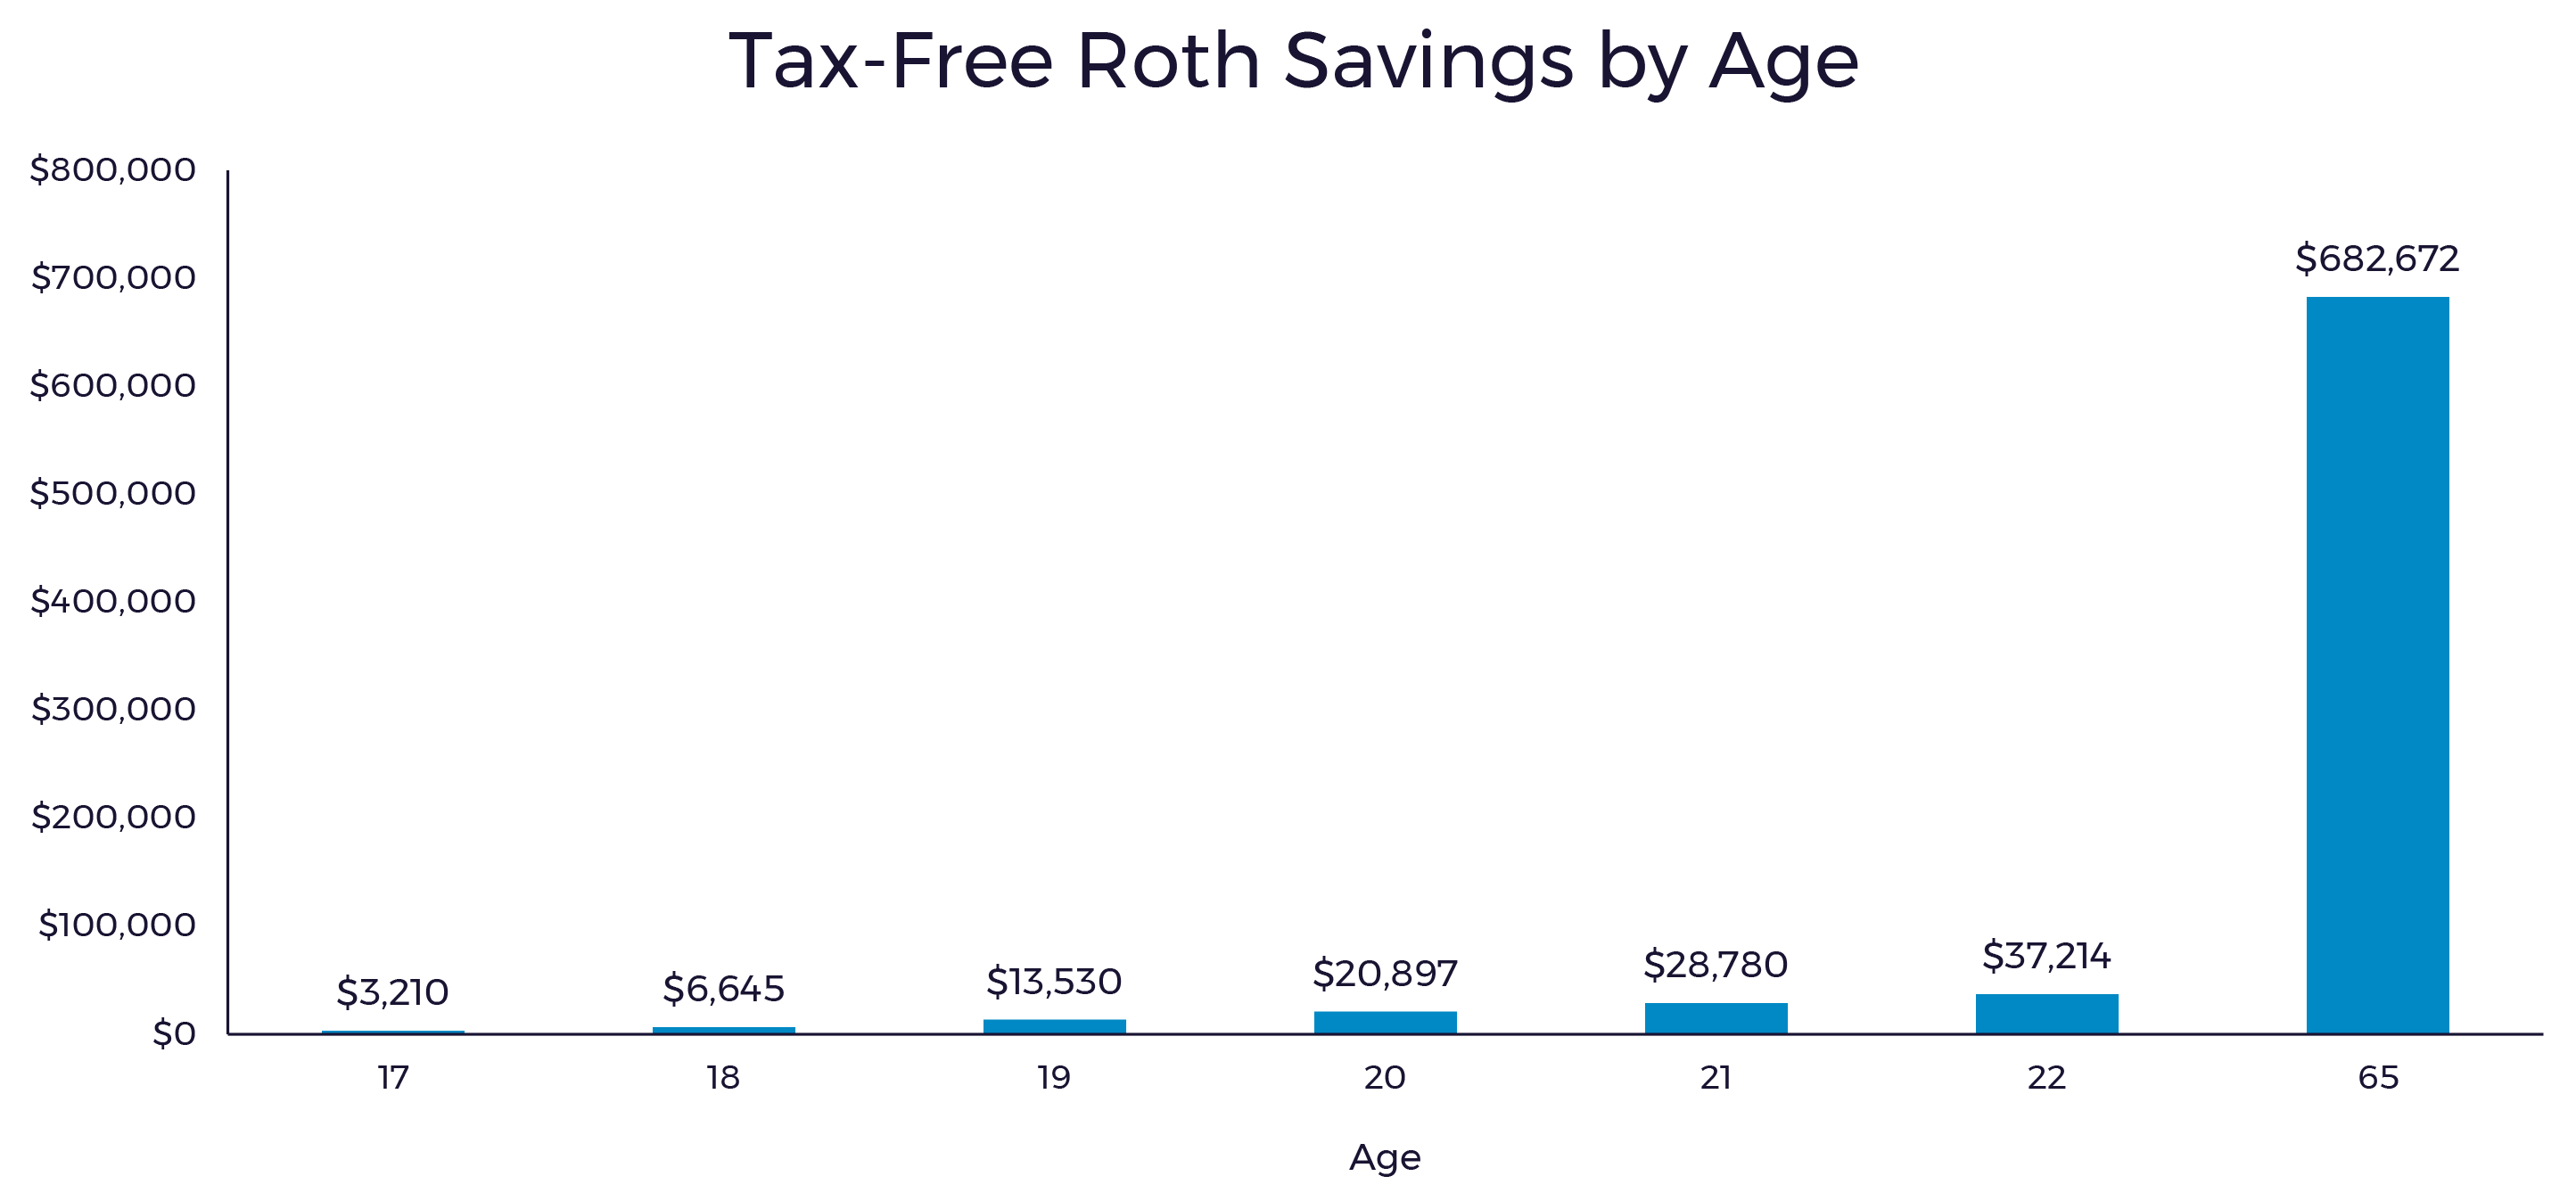 Tax-Free Roth Savings by Age Graphic